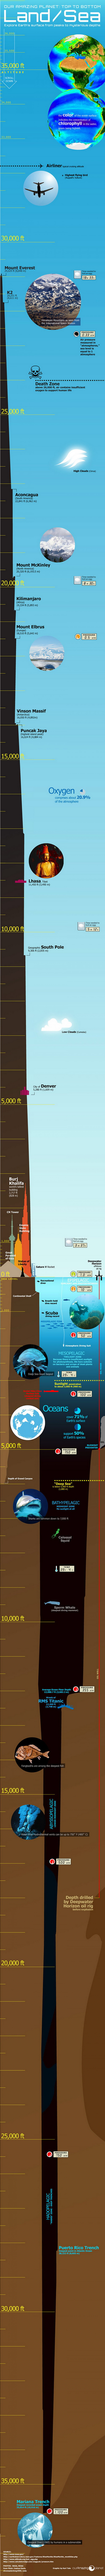 tallest-mountain-to-deepest-ocean-trench (s)